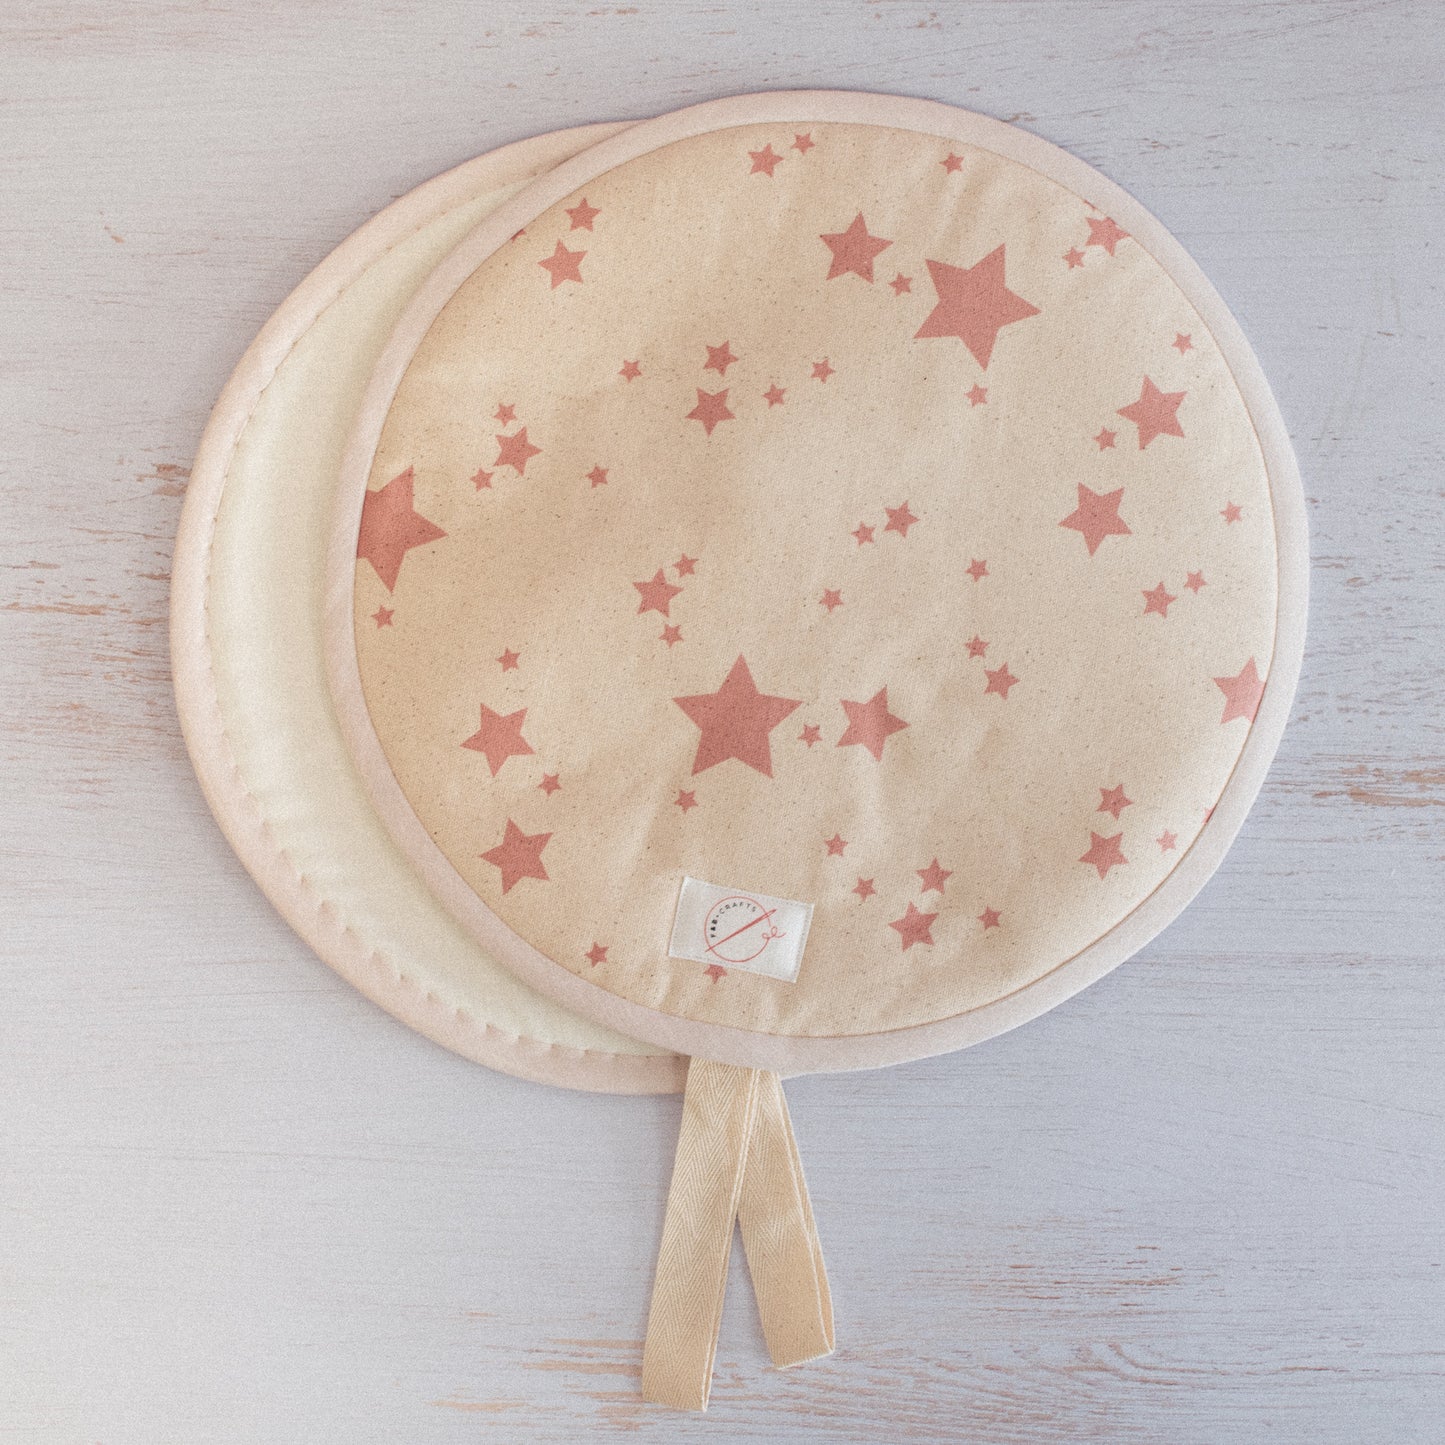 F&B Crafts Pink Stars Hob Covers - Vintage Rustic Style Country Kitchen Decor